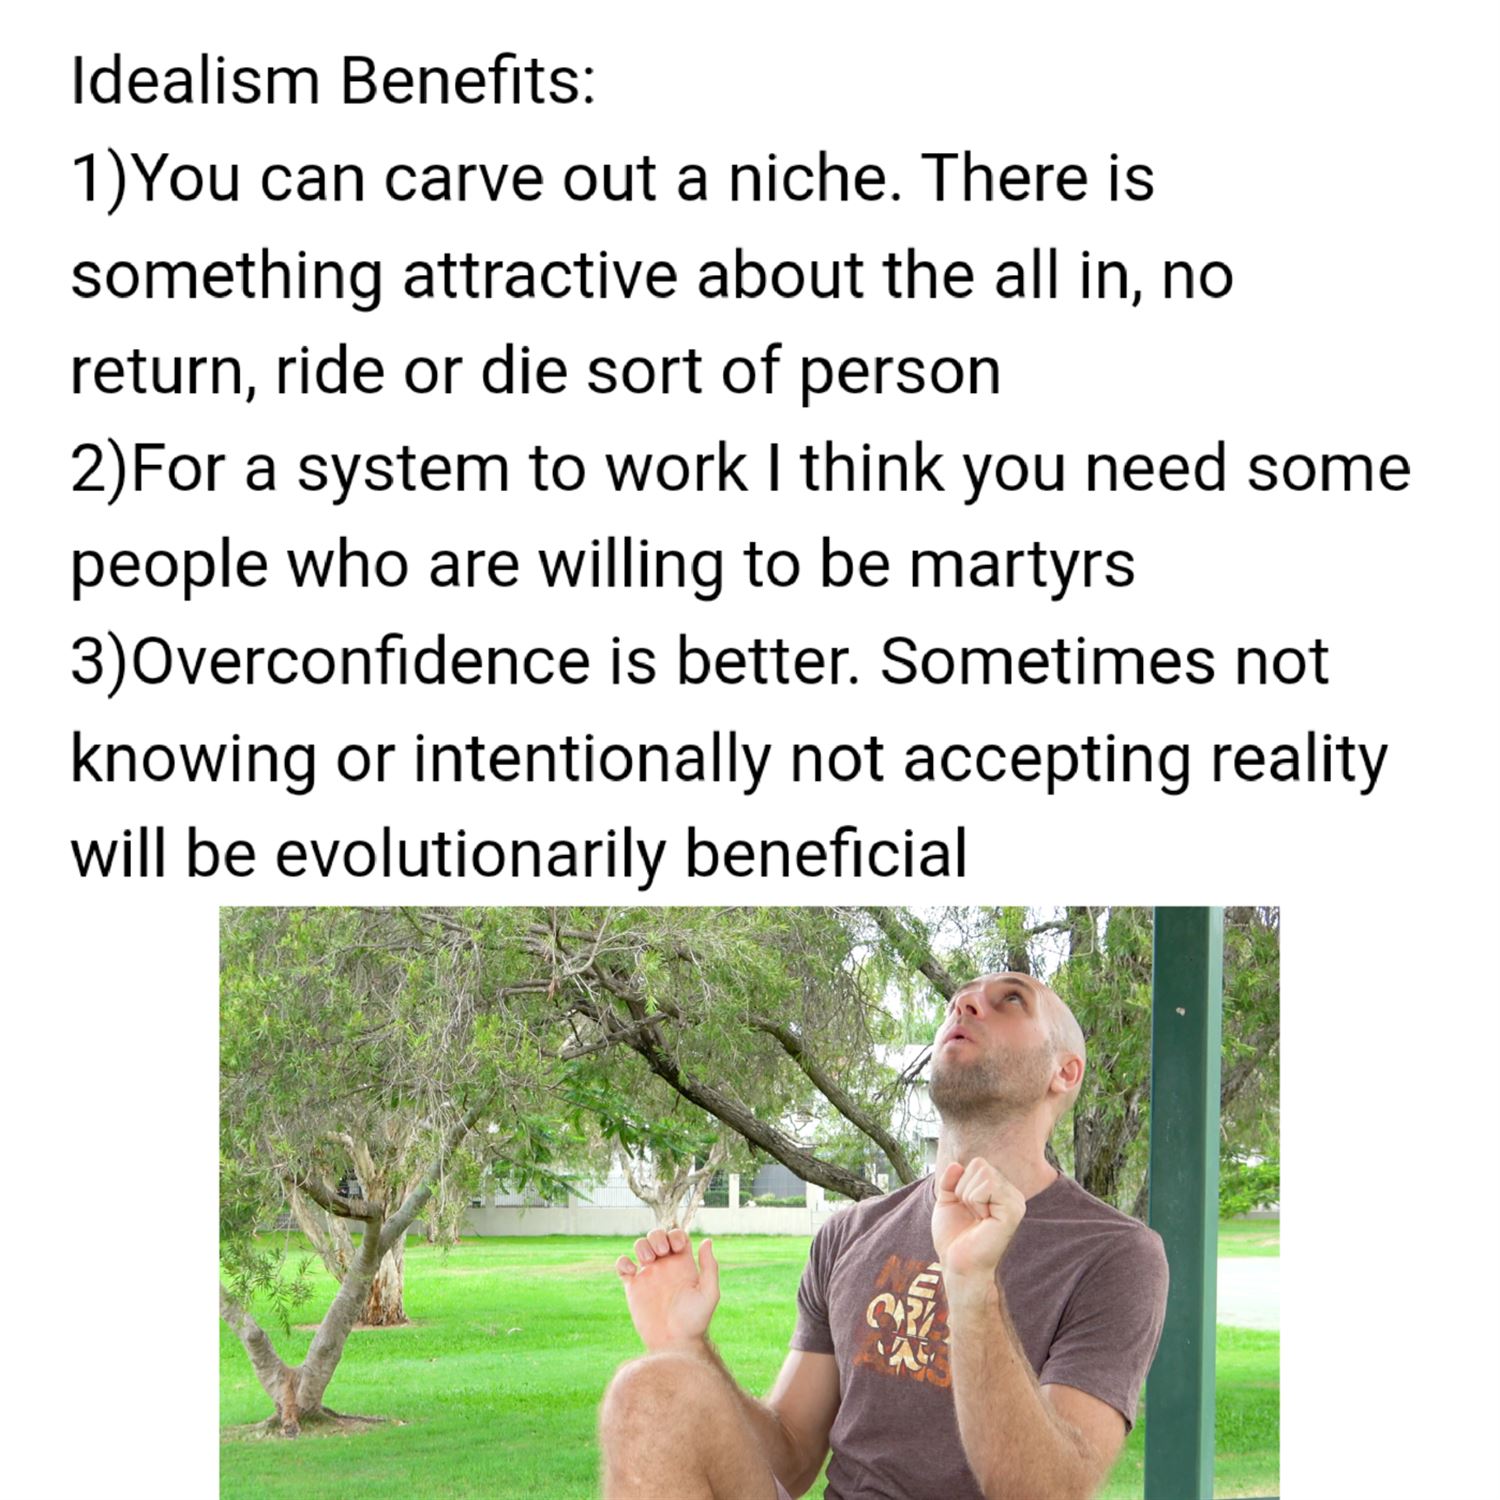 Why Idealism is beneficial